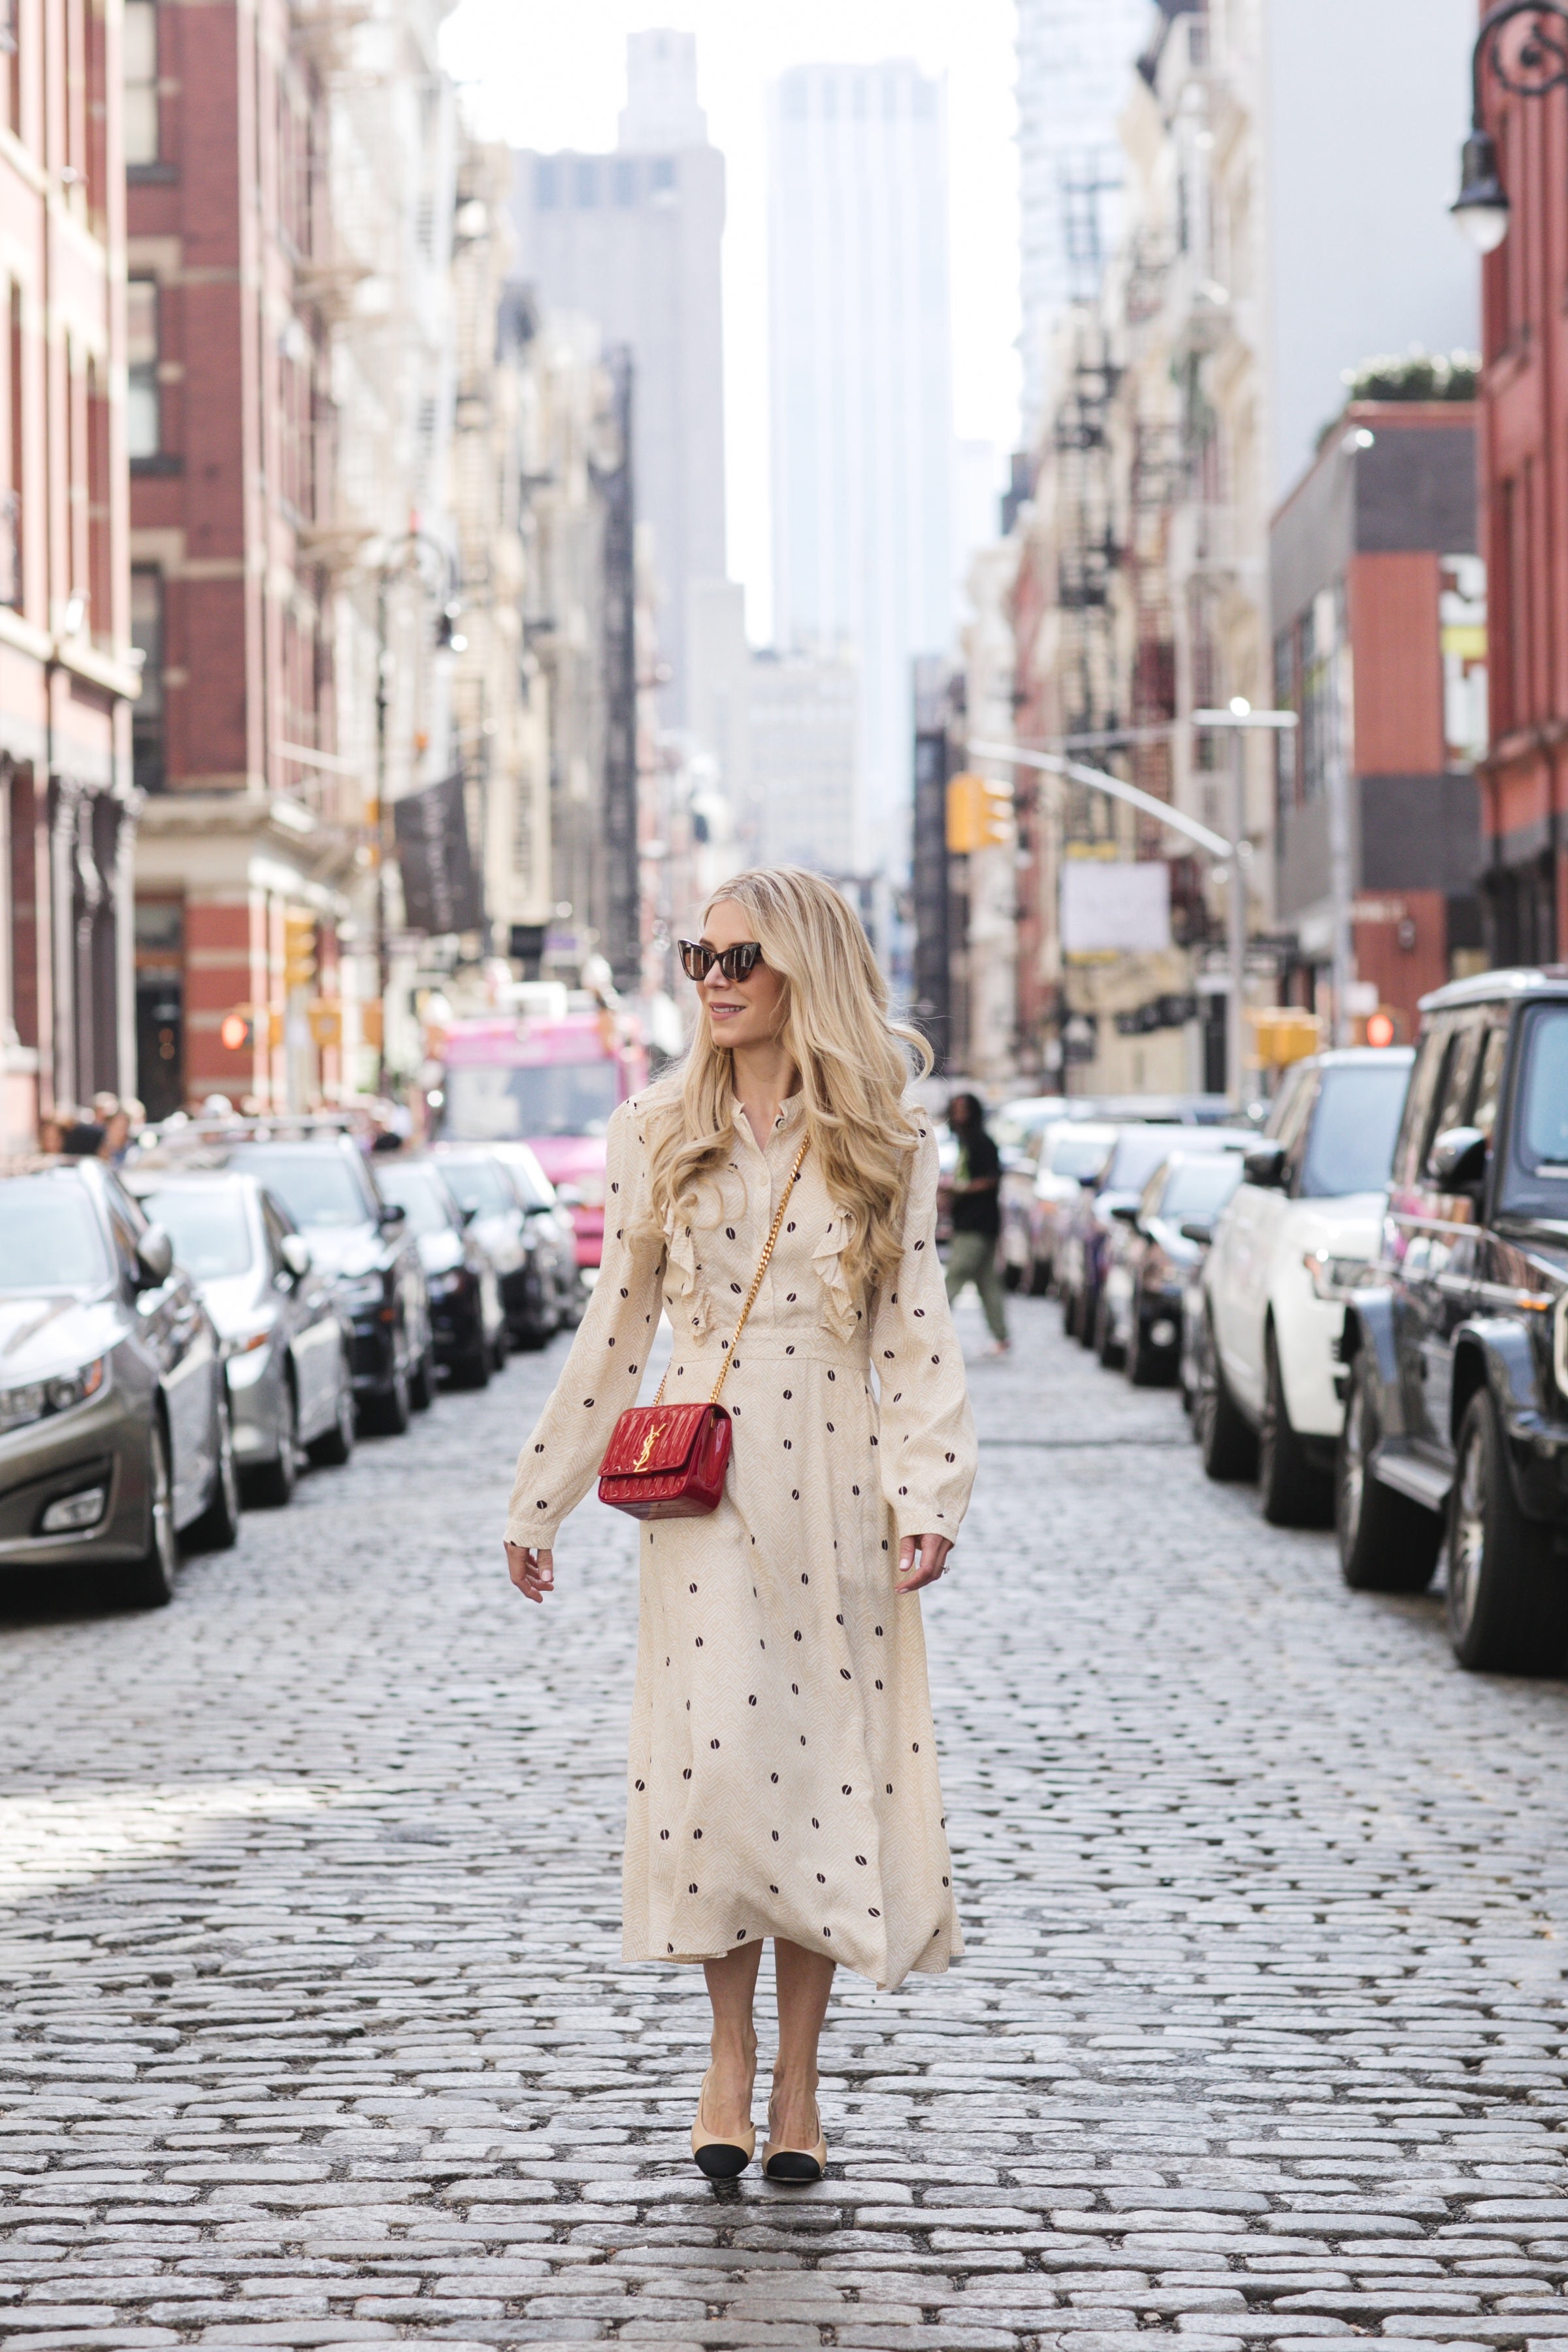 & Other Stories coffee bean dress, Saint Laurent Vicky bag, www.abouttheoutfits.com, About the Outfits, Laura Bonner